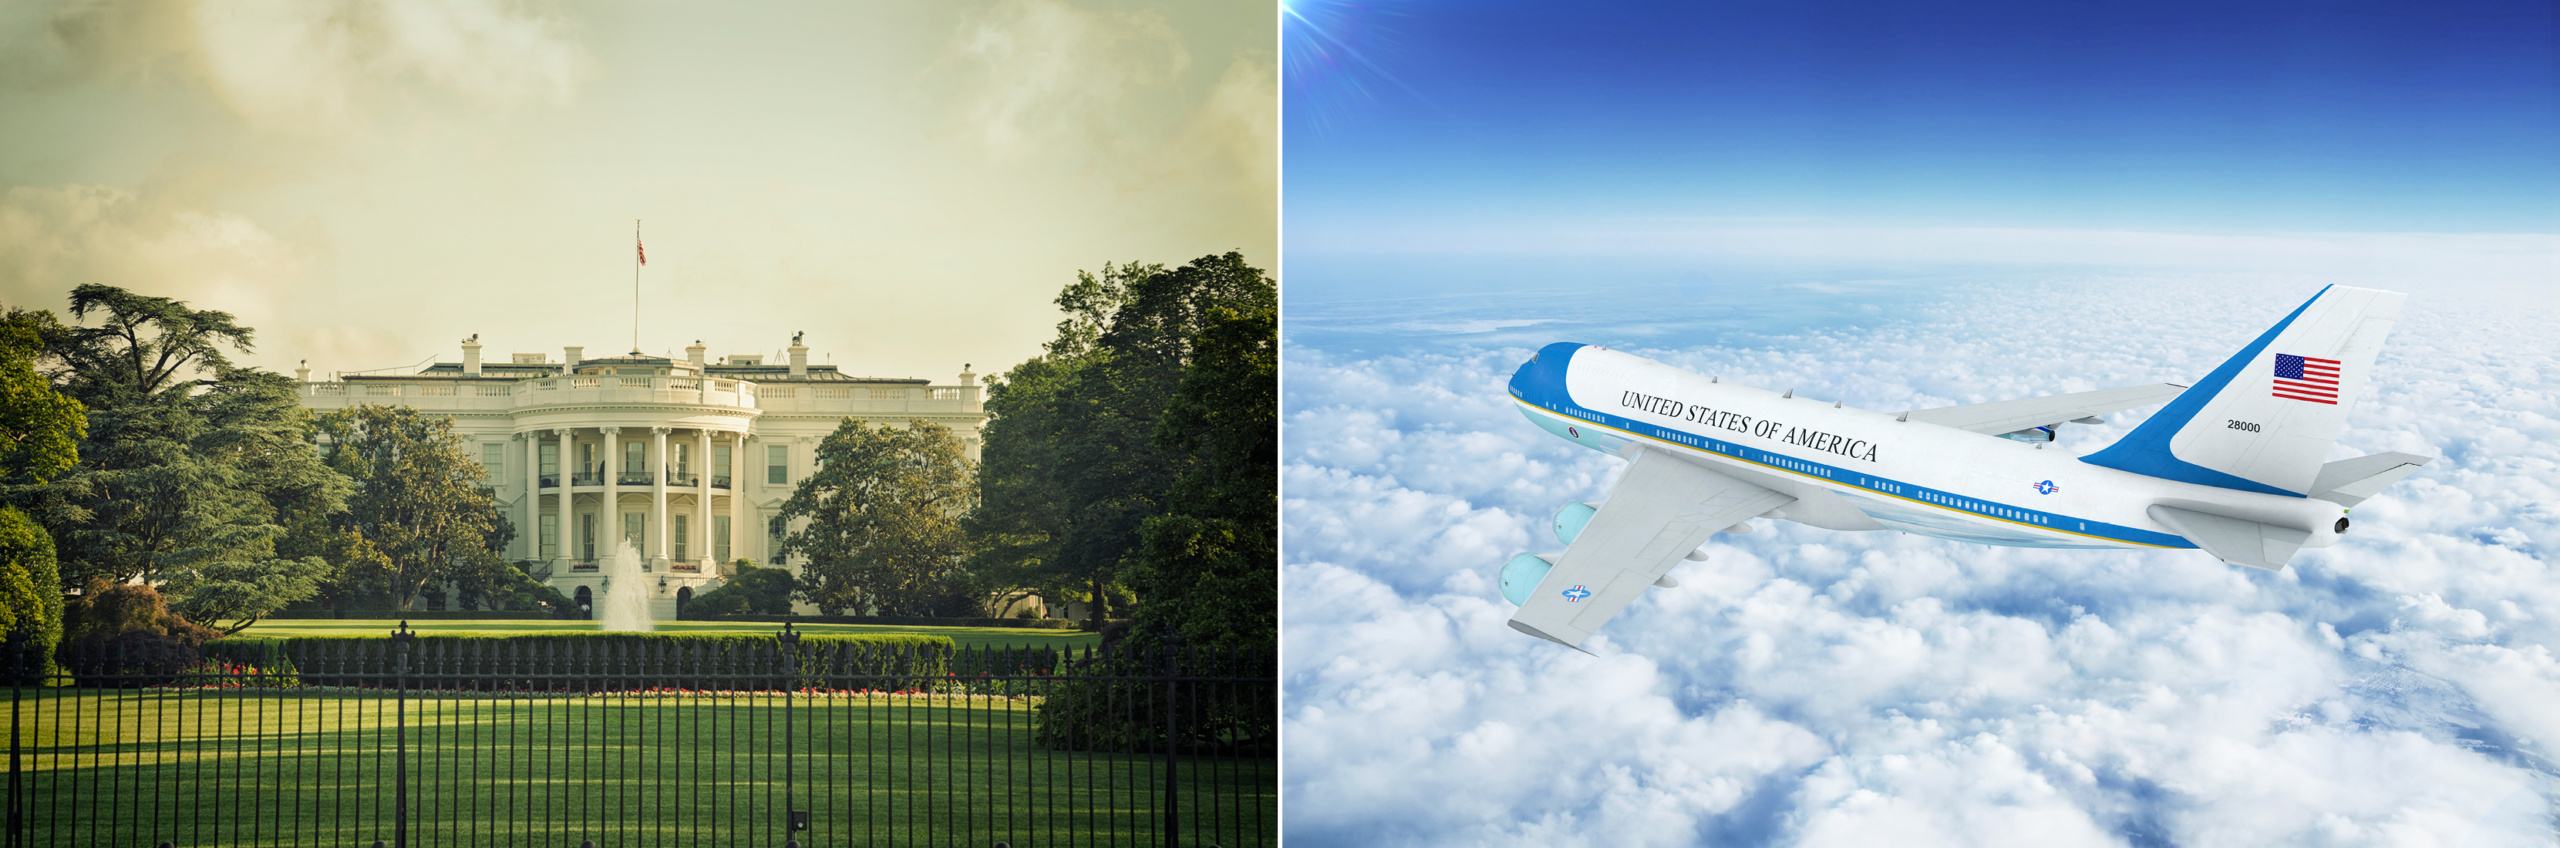 The White House and Air Force One flying in the sky